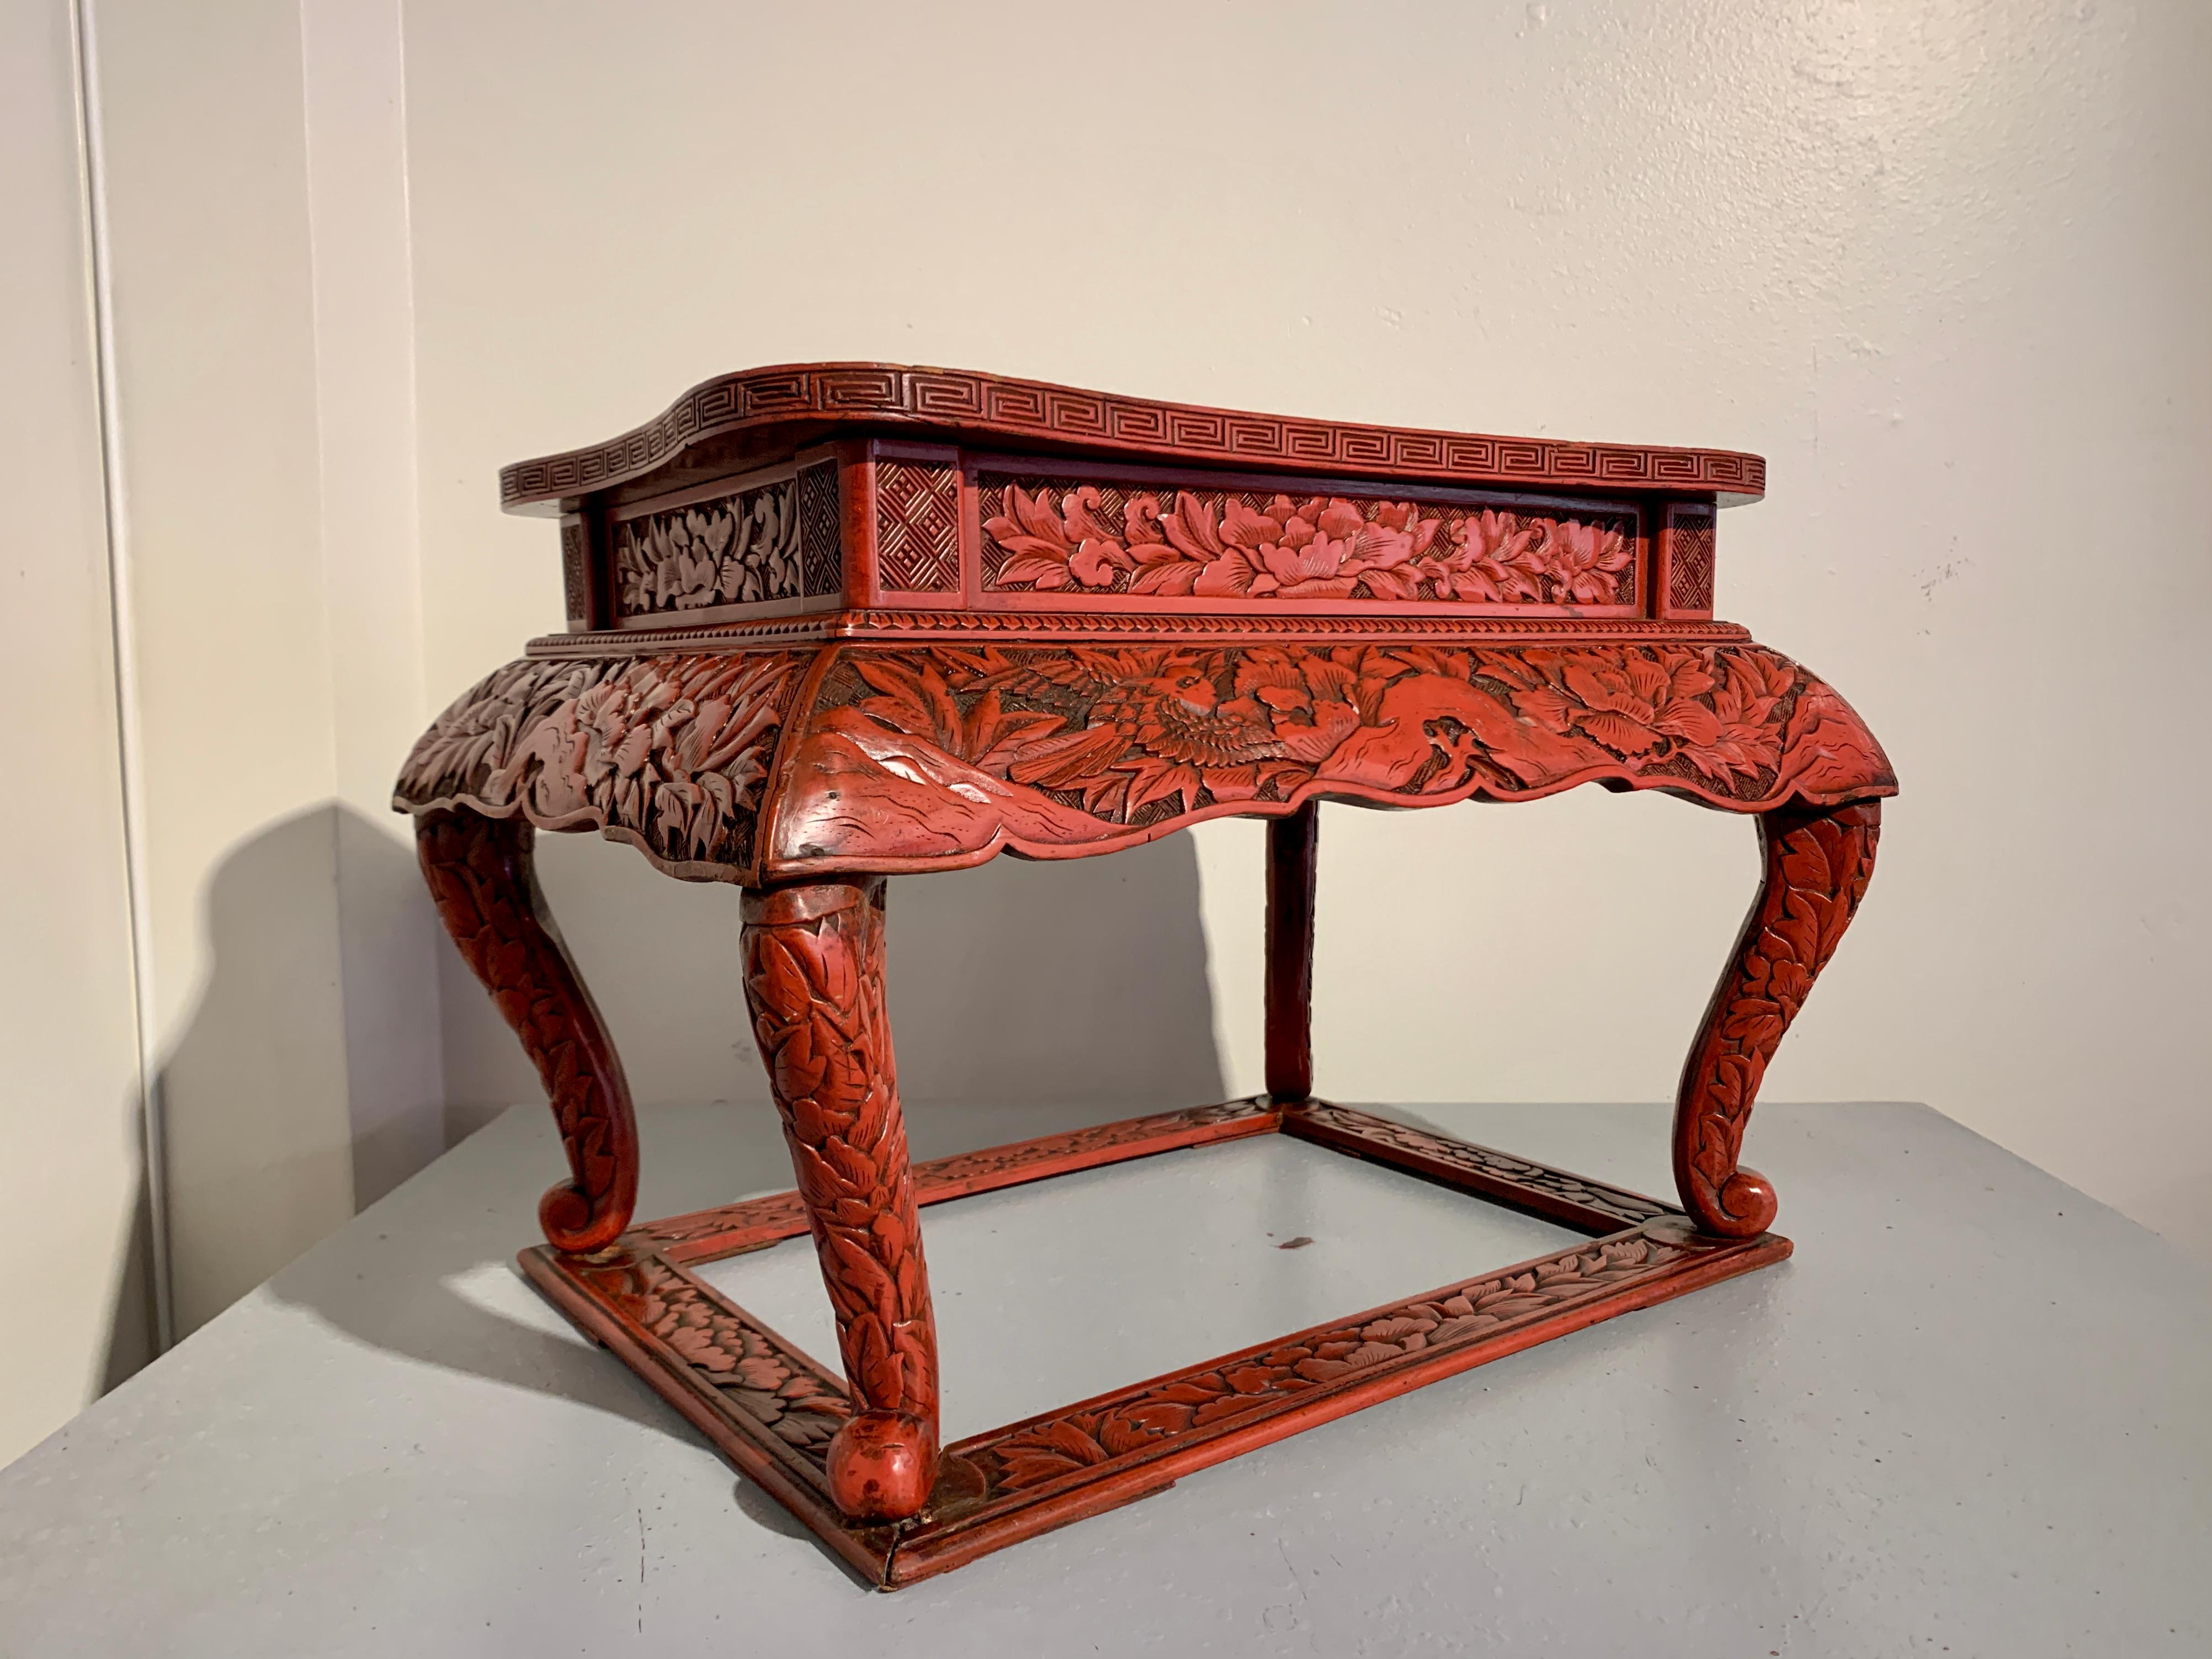 A very fine and rare Japanese Kamakura-bori carved wood and red lacquered incense stand, Edo period, early 19th century, Japan.

The low stand is based on Chinese Ming Dynasty carved cinnabar lacquer prototypes, and features elegant cabriole legs